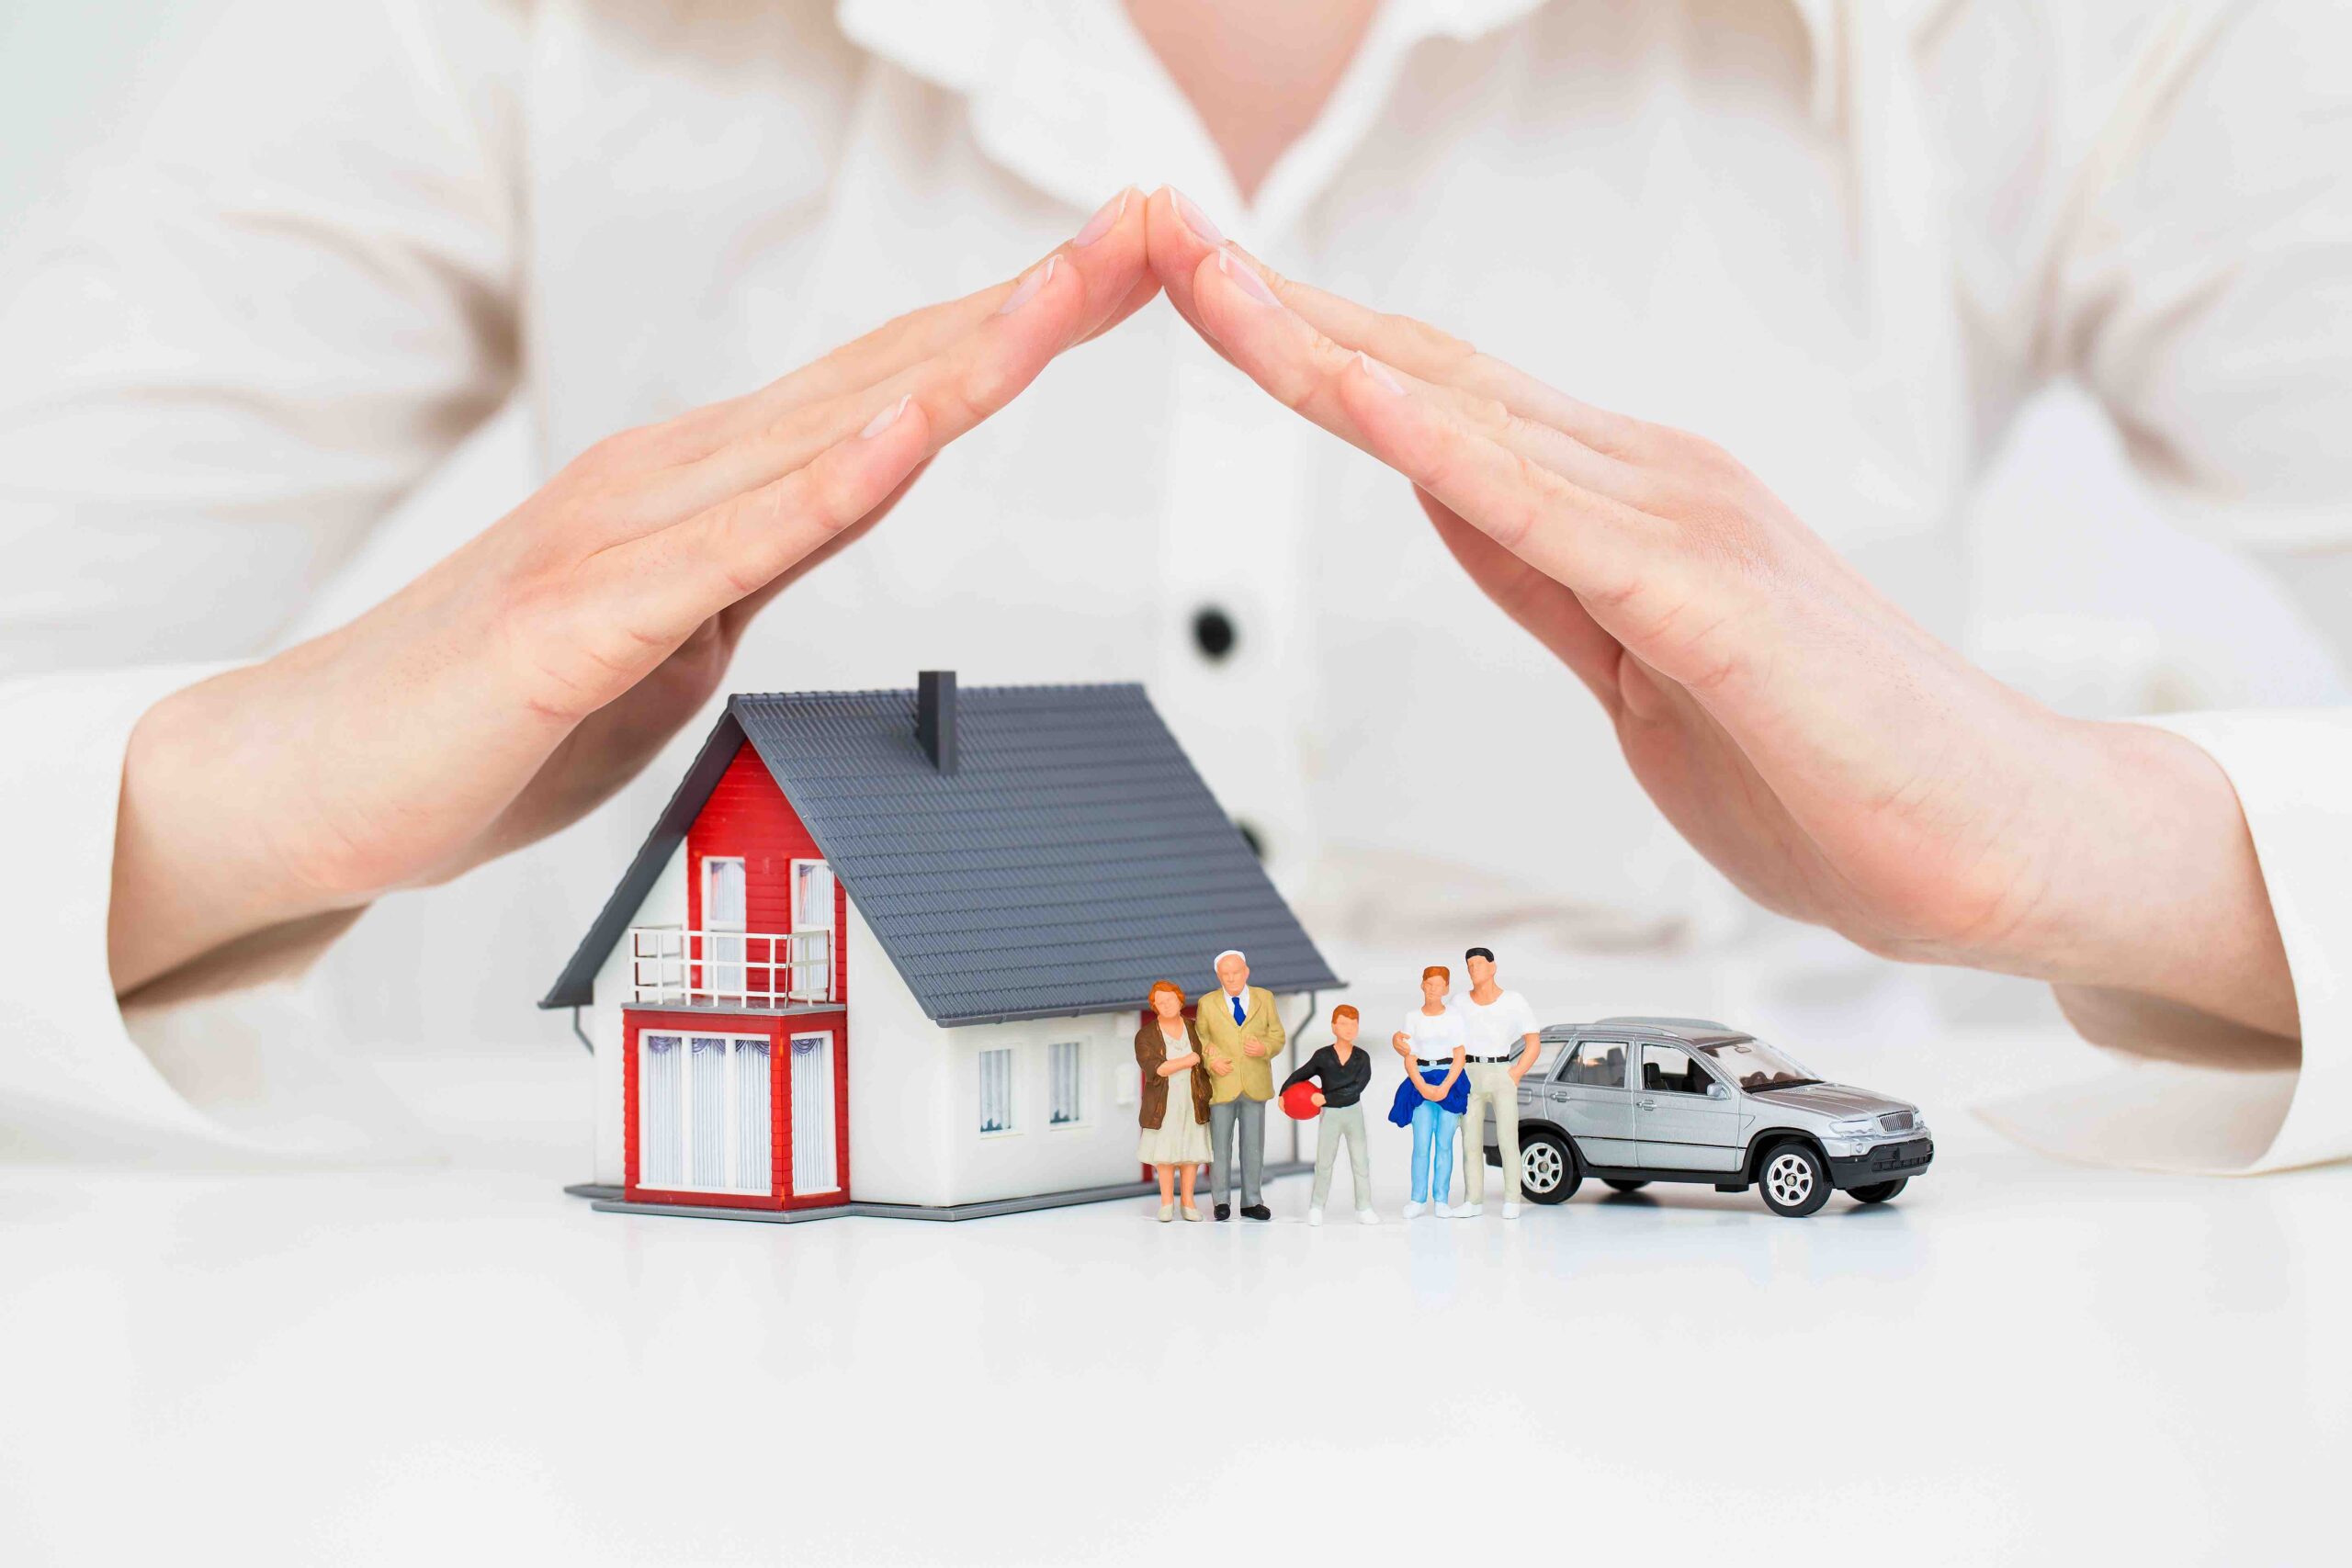 Doing your research is important to find what kind of home insurance you need for a house